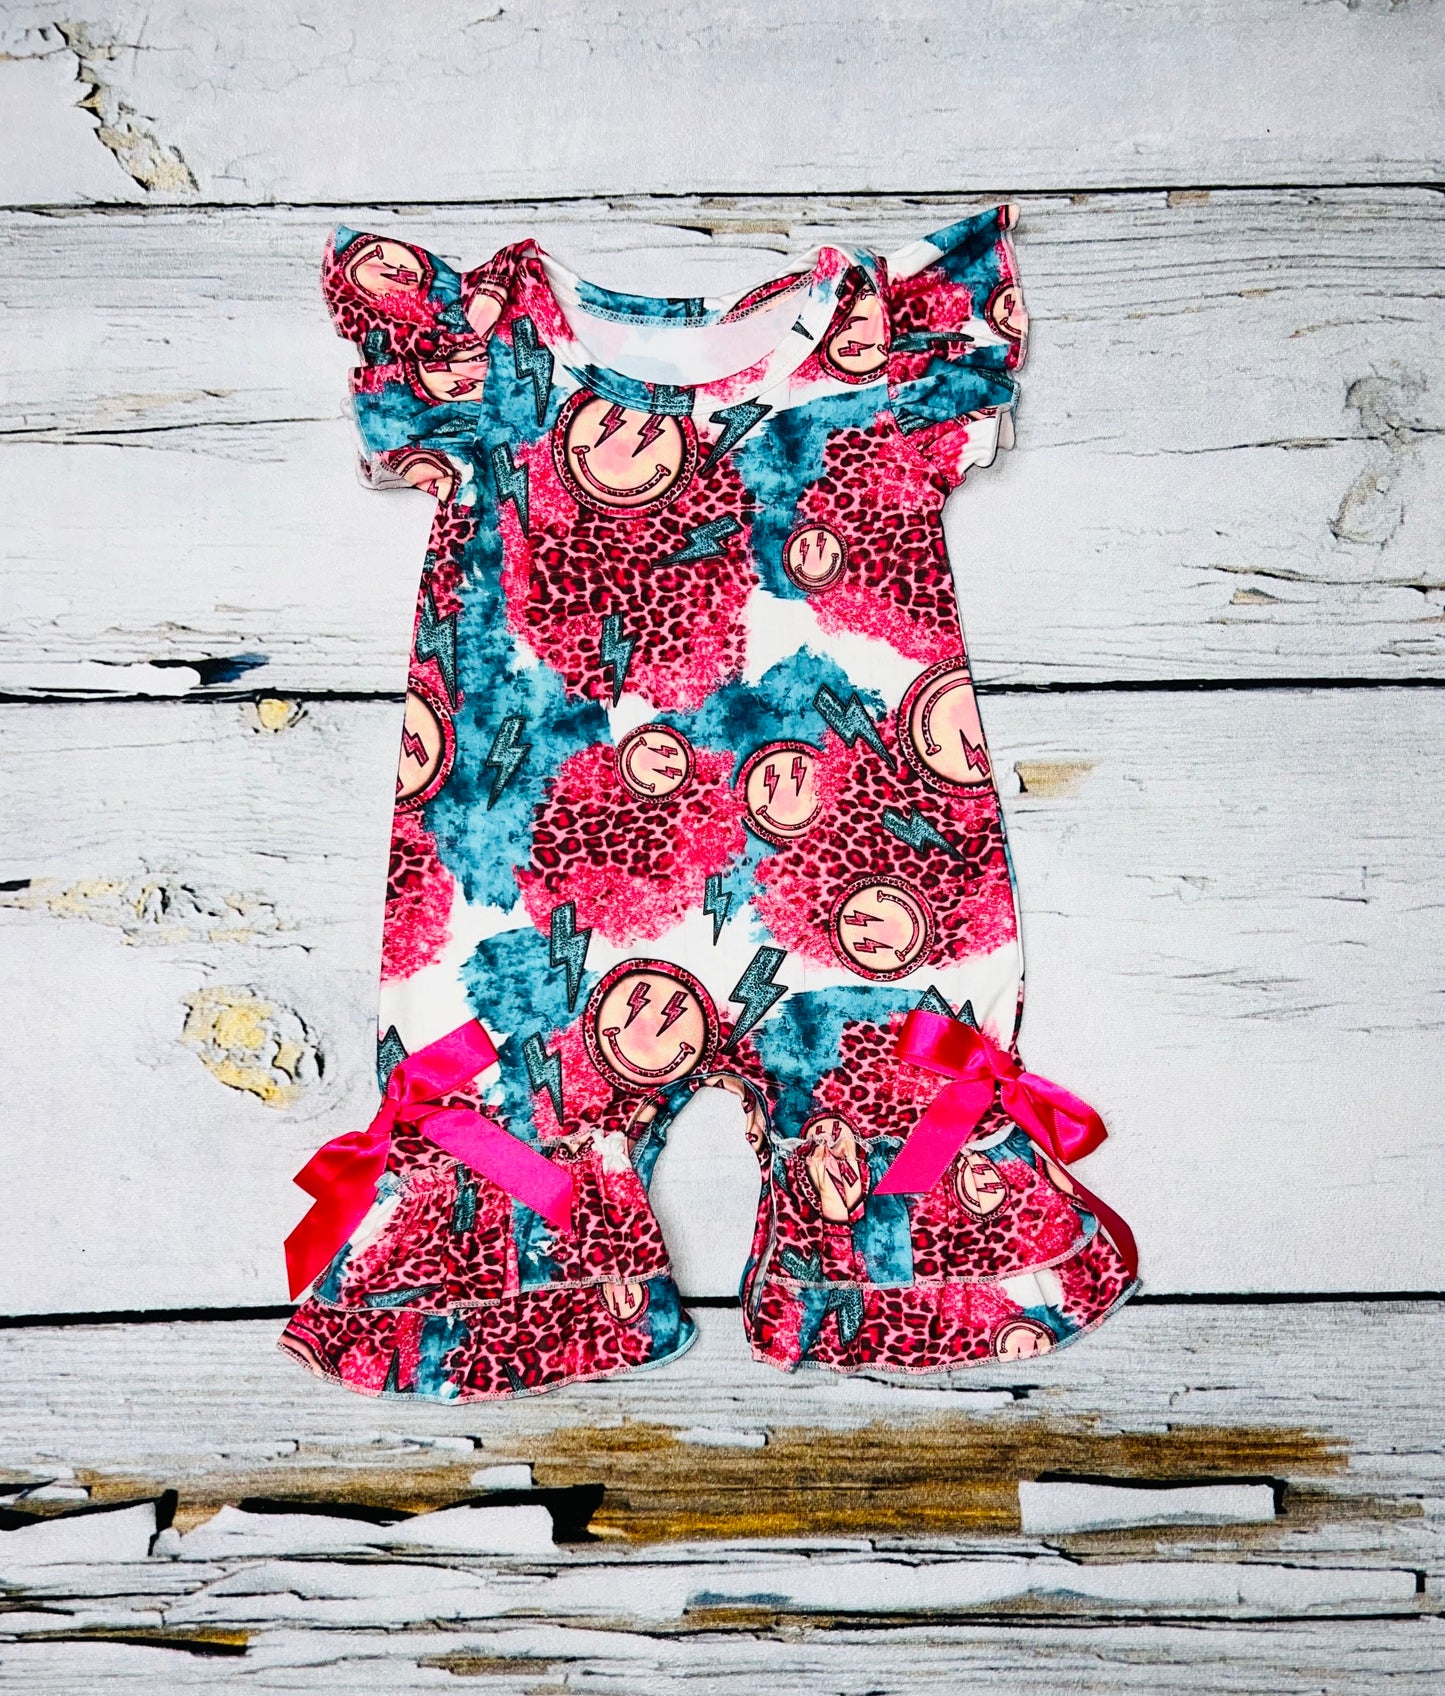 Smiley face w/hot pink cheetah print ruffle baby romper DLH1124-11